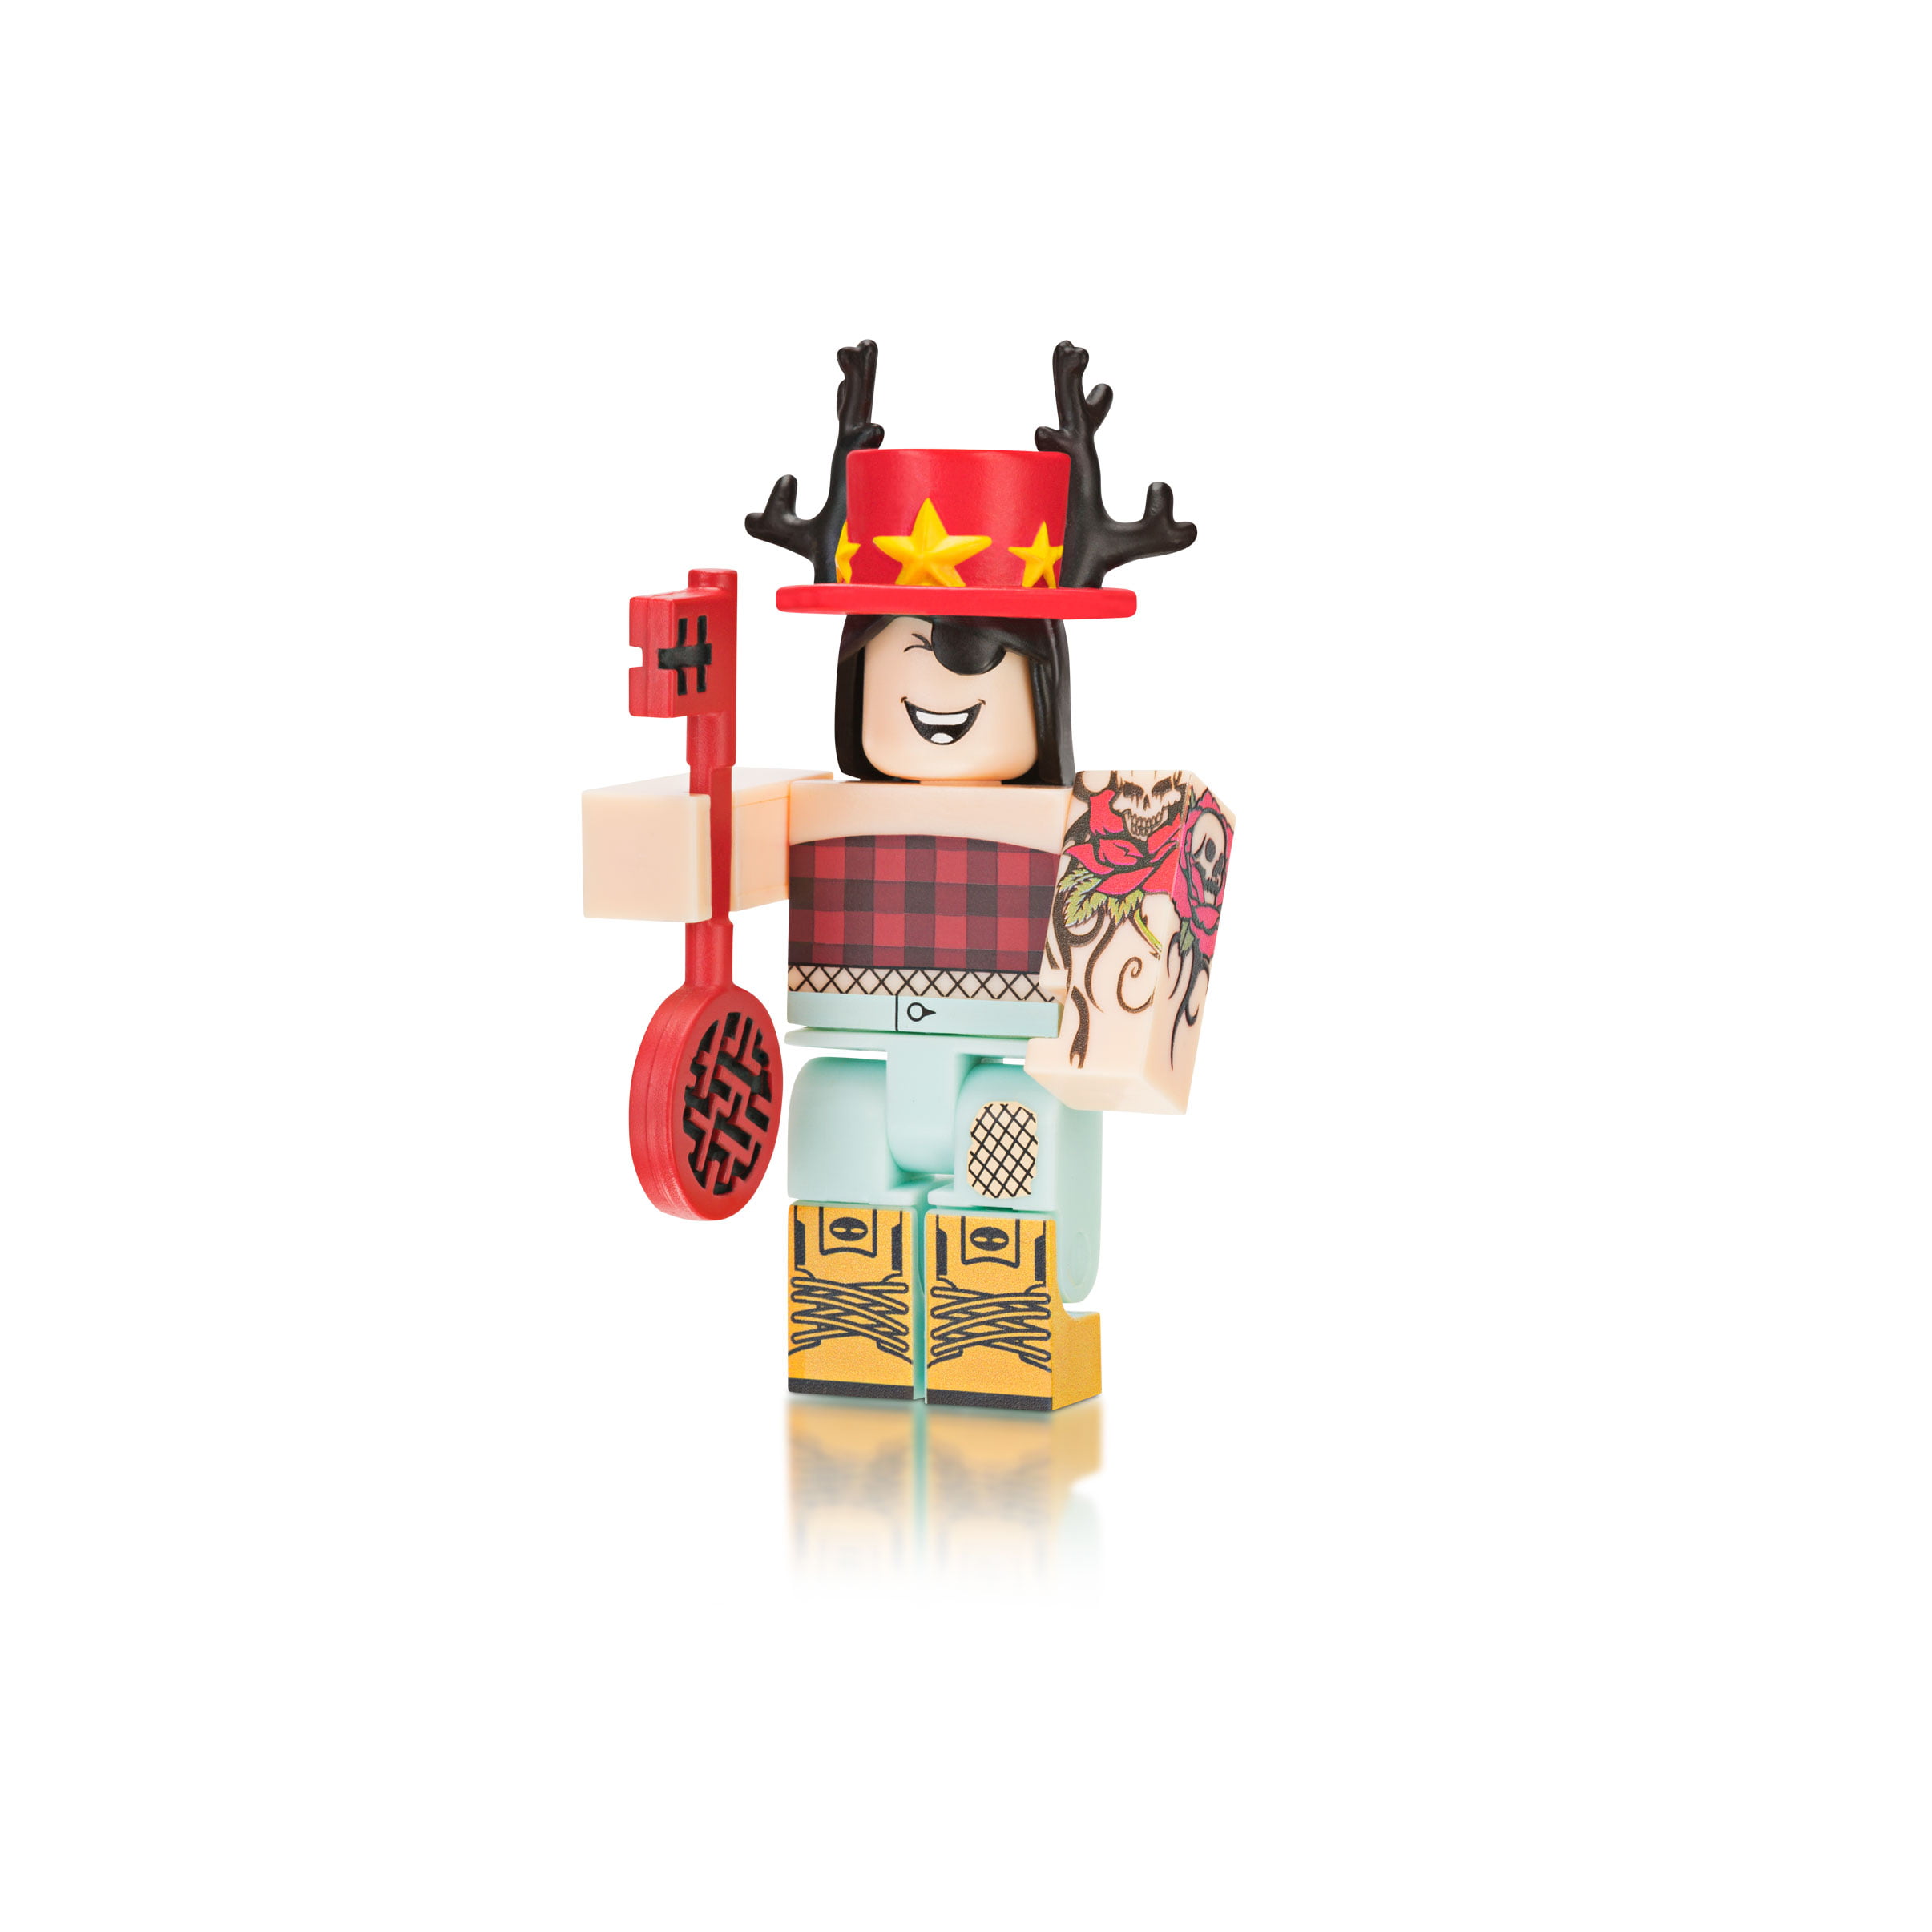 Roblox Celebrity Collection Series 4 Mystery Figure Includes 1 Figure Exclusive Virtual Item Walmart Com Walmart Com - figura roblox celebrity blind box series 4